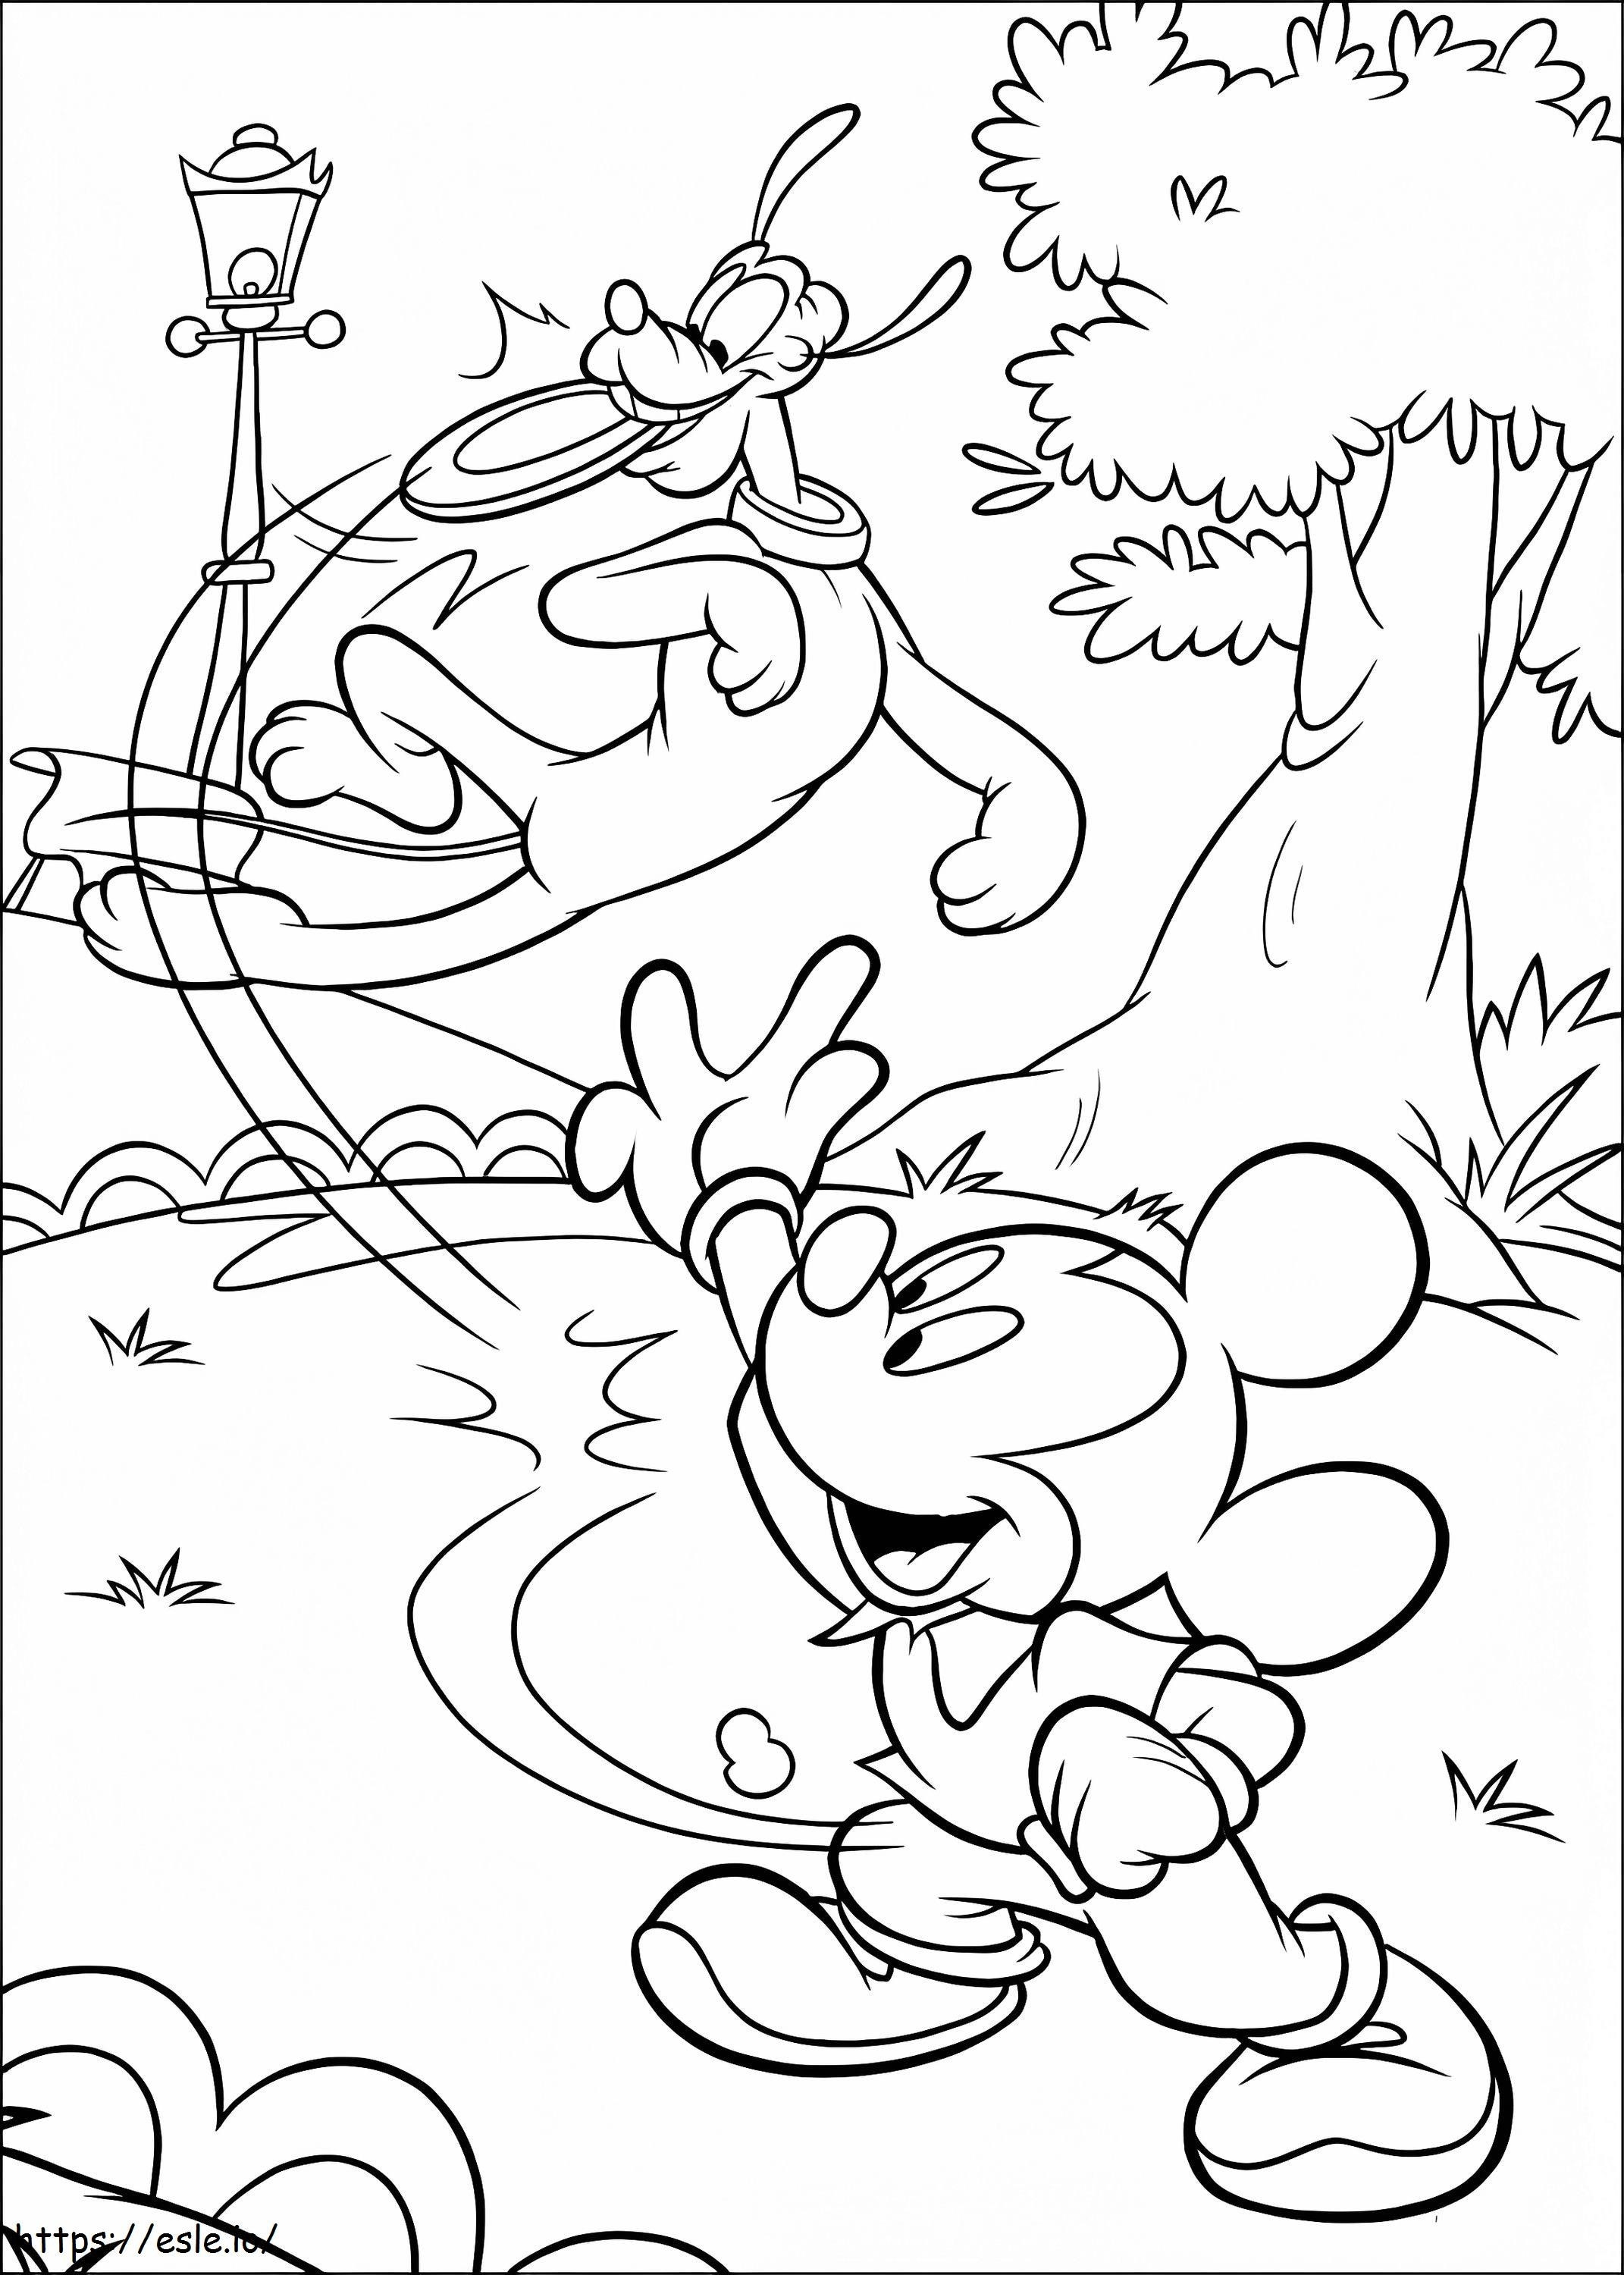 Mickey Playing With Pluto coloring page